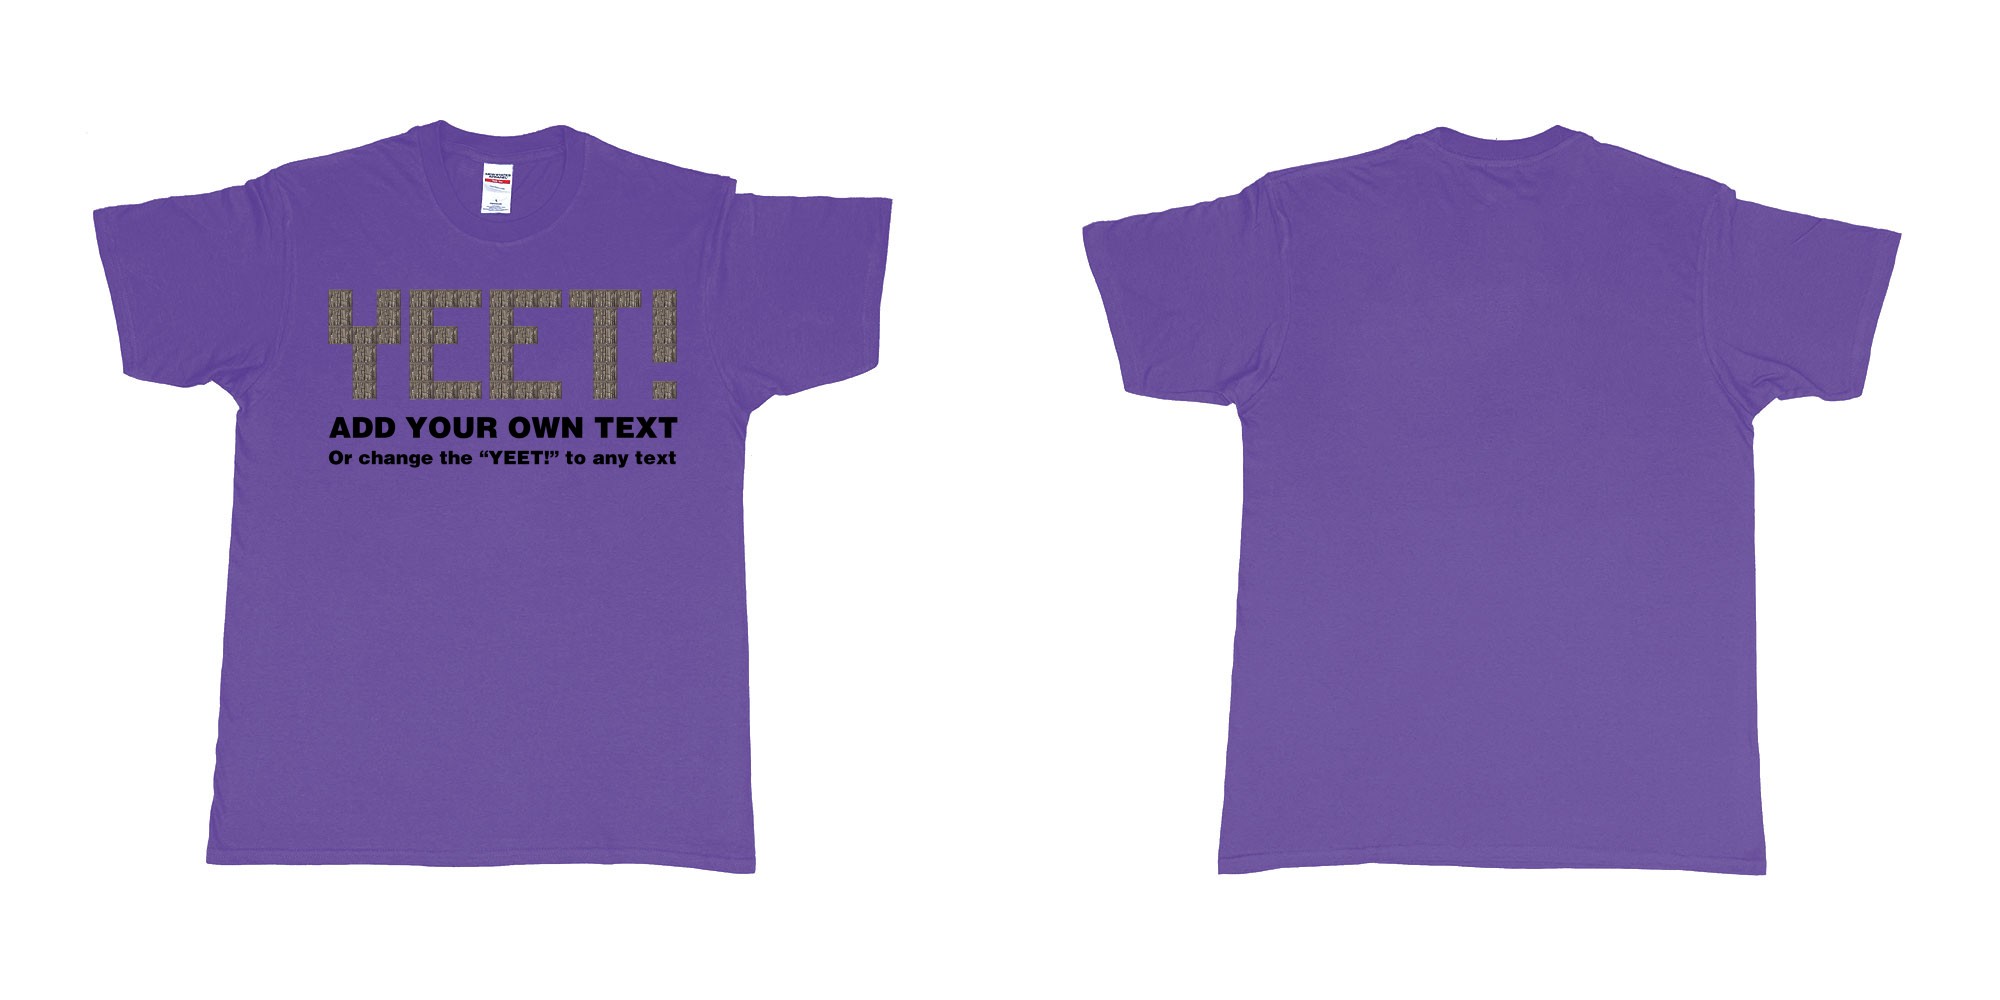 Custom tshirt design fortnite wood wall custom text yeet design in fabric color purple choice your own text made in Bali by The Pirate Way